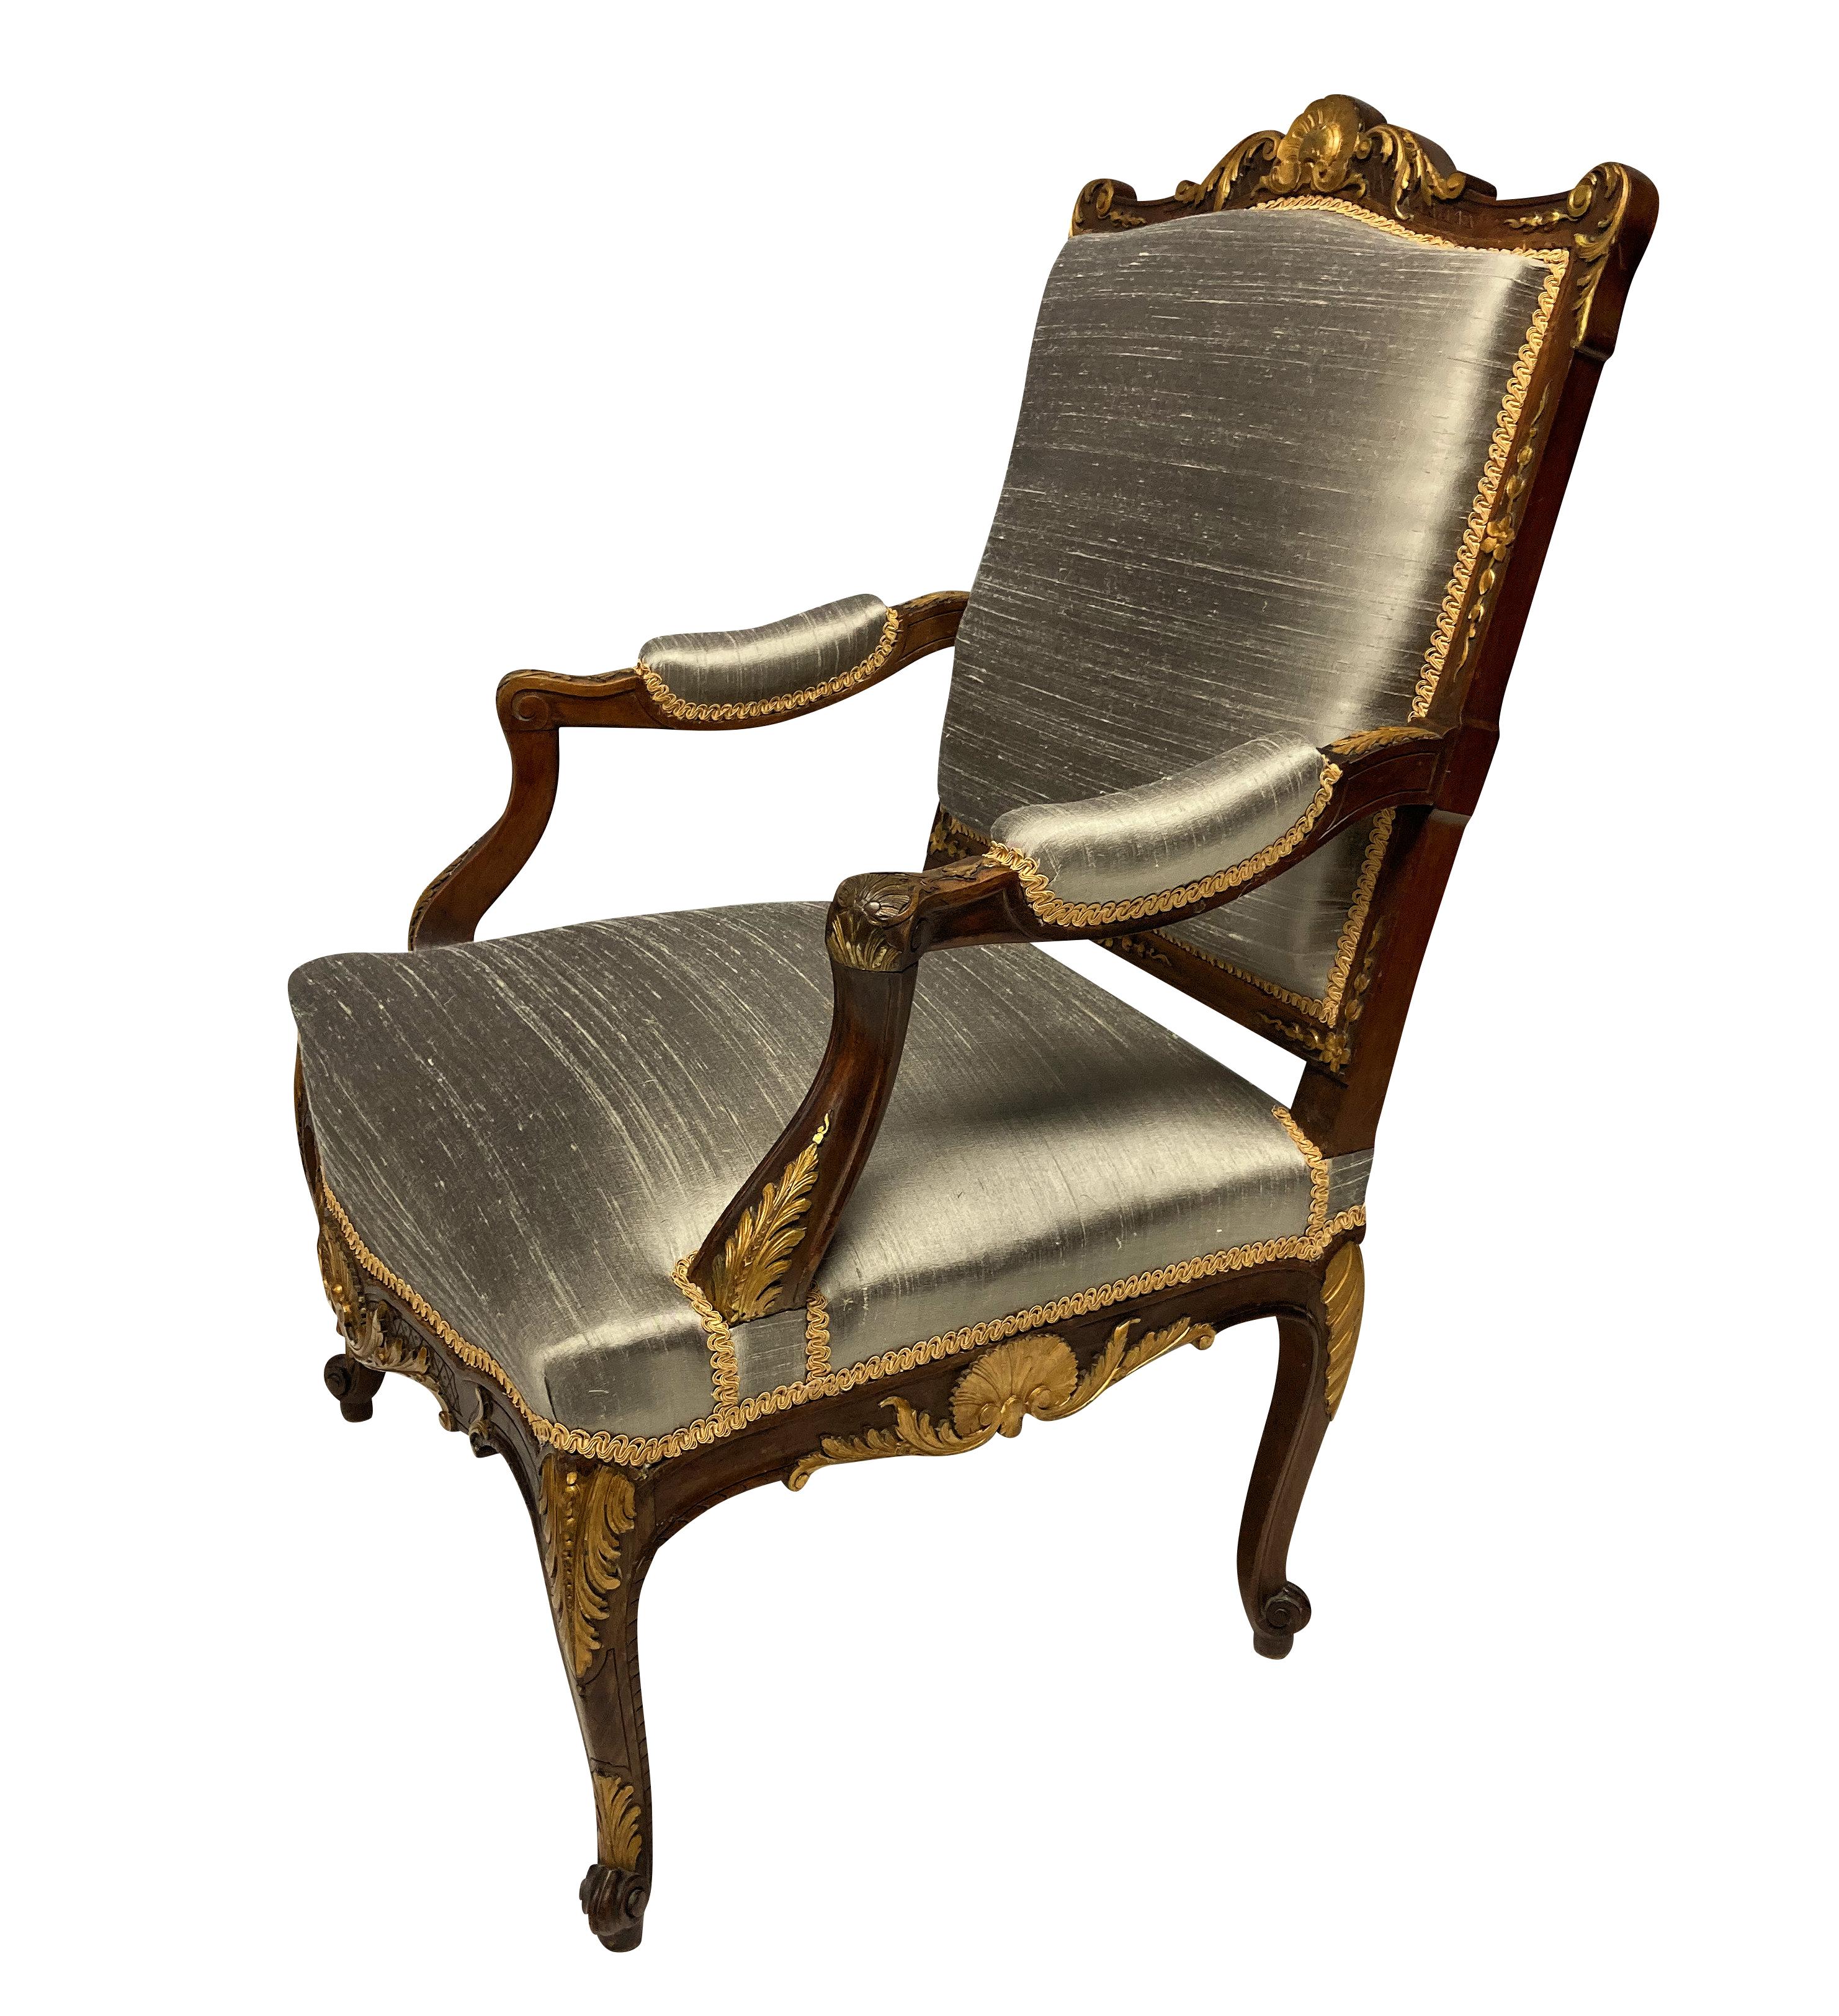 A French finely carved walnut and parcel-gilt Louis XV style armchair, newly upholstered in textured silk.